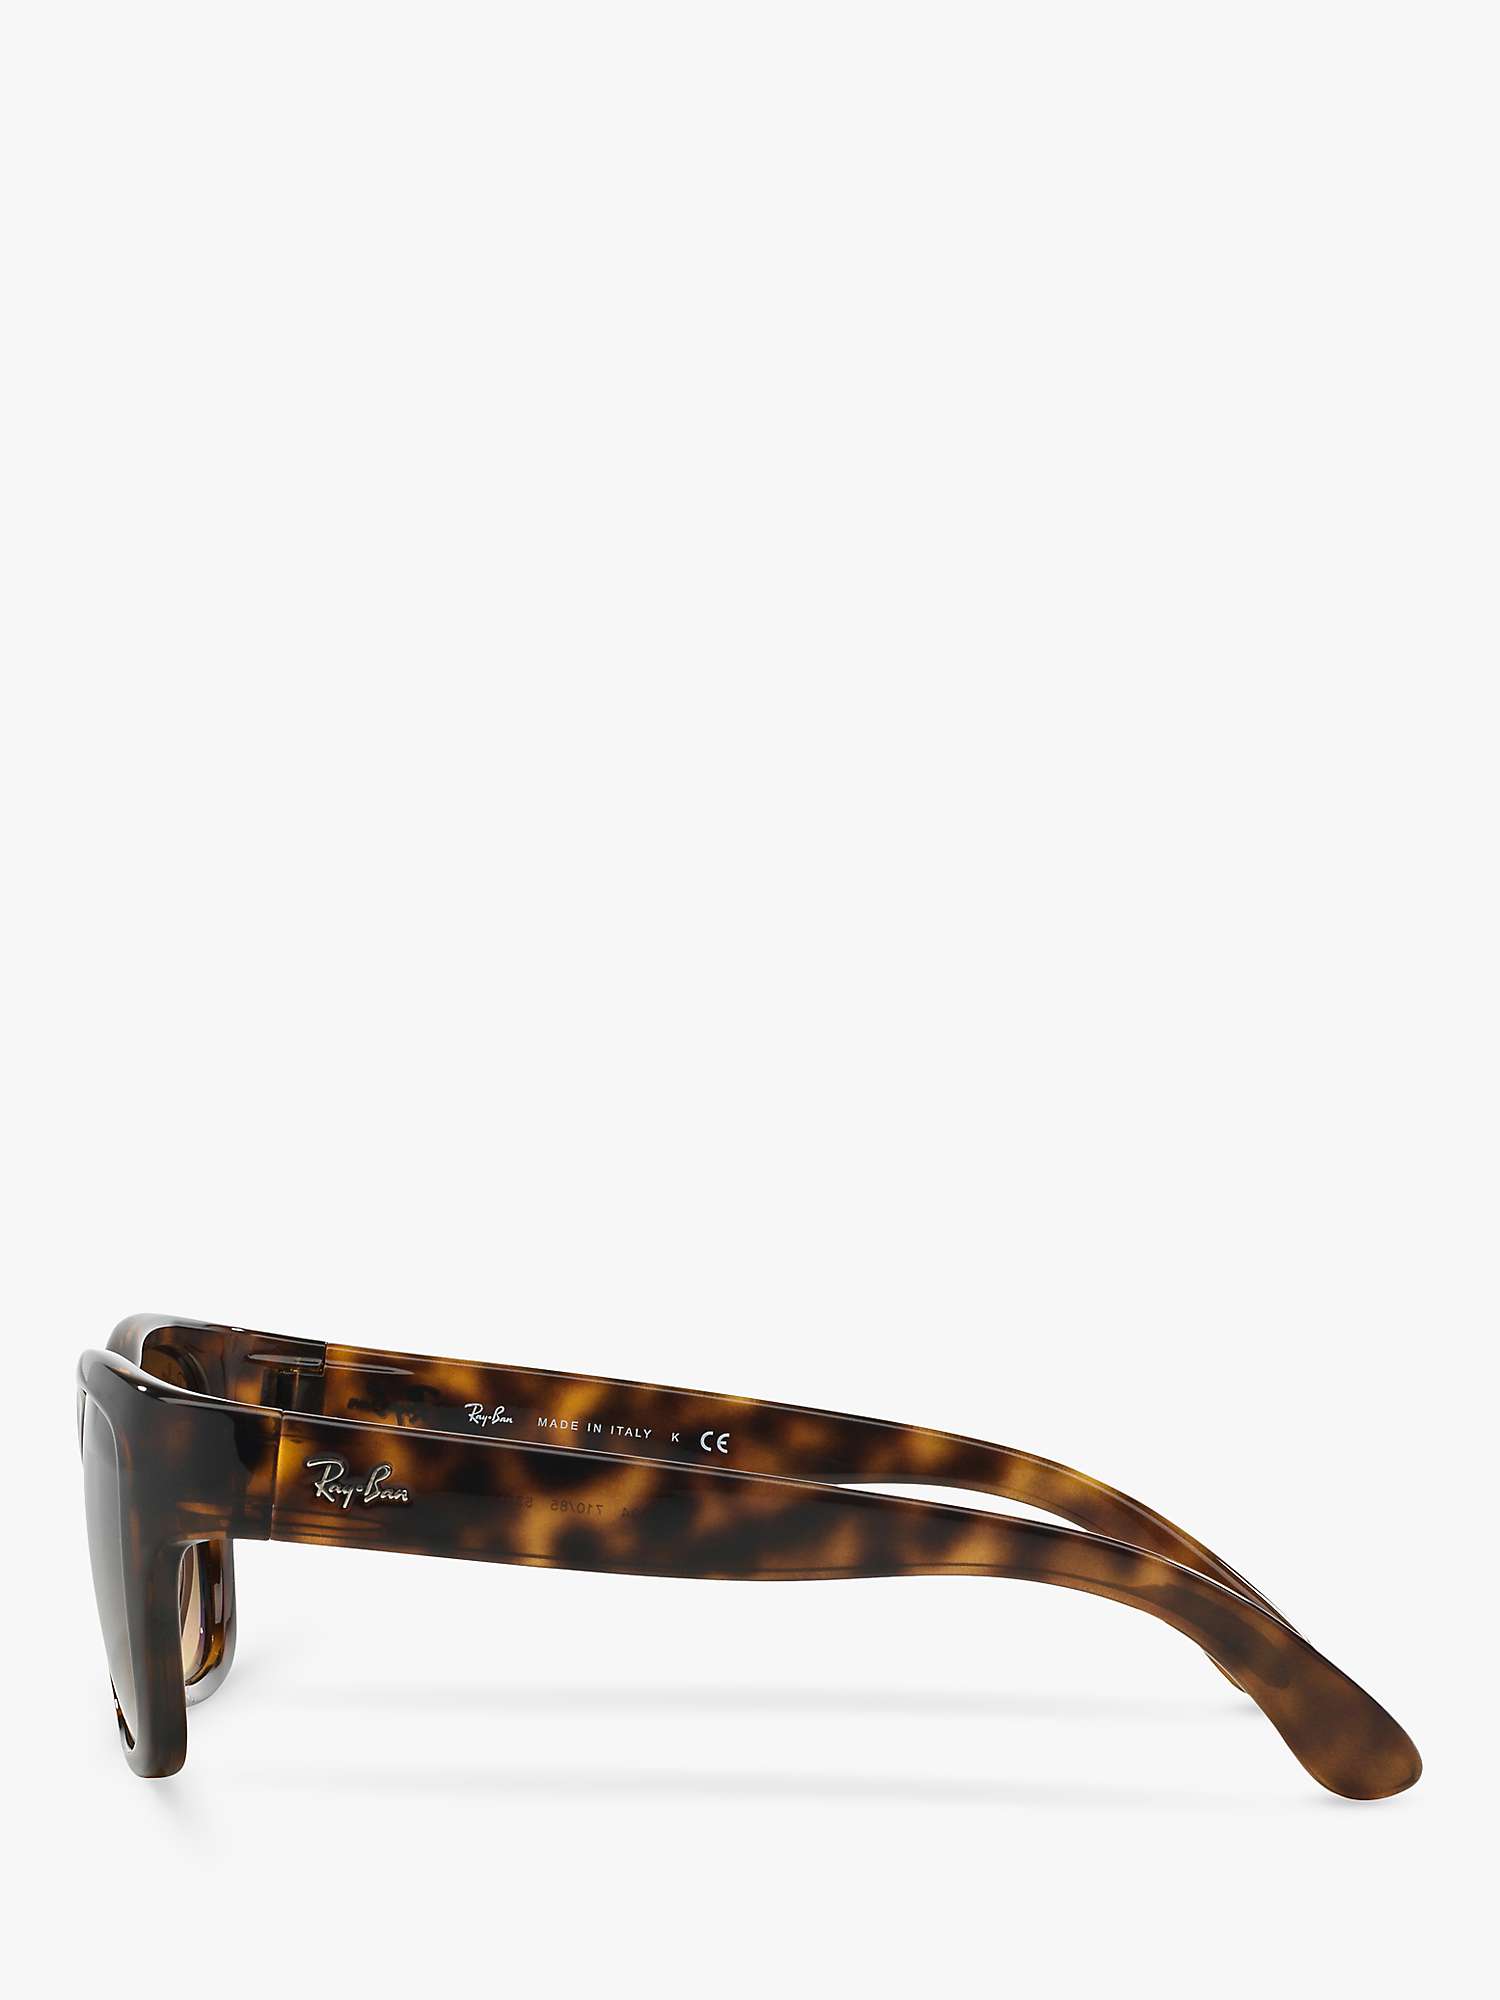 Buy Ray-Ban RB4194 Unisex Square Sunglasses, Havana/Brown Online at johnlewis.com